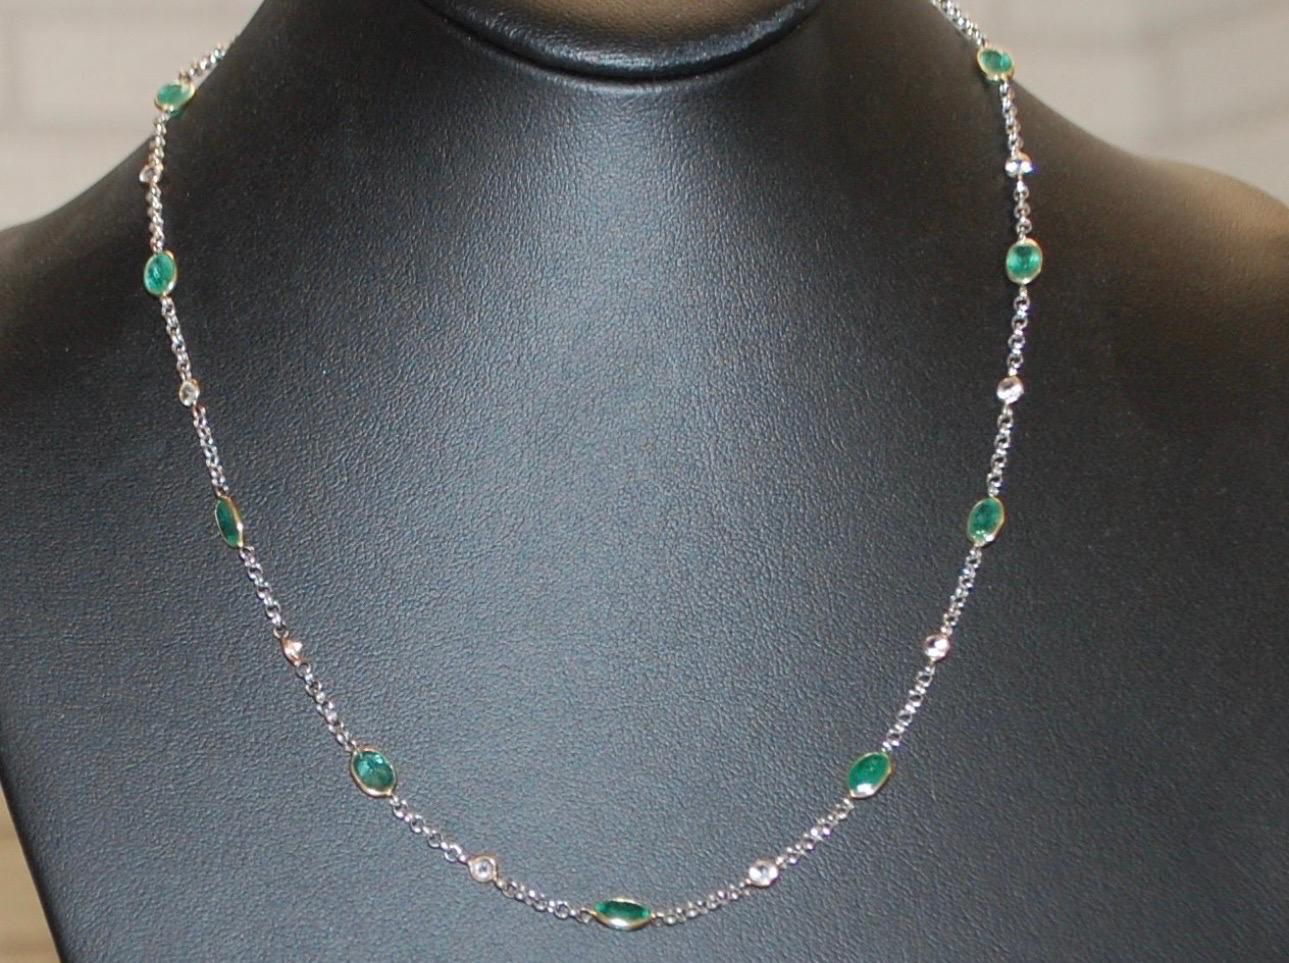 Stunning elegant emerald and diamond necklace made with matching oval emeralds (Colombian origin) Colombian emeralds are bluish green and usually more transparent, this necklace is made with conflict free diamonds as per certificate originating from